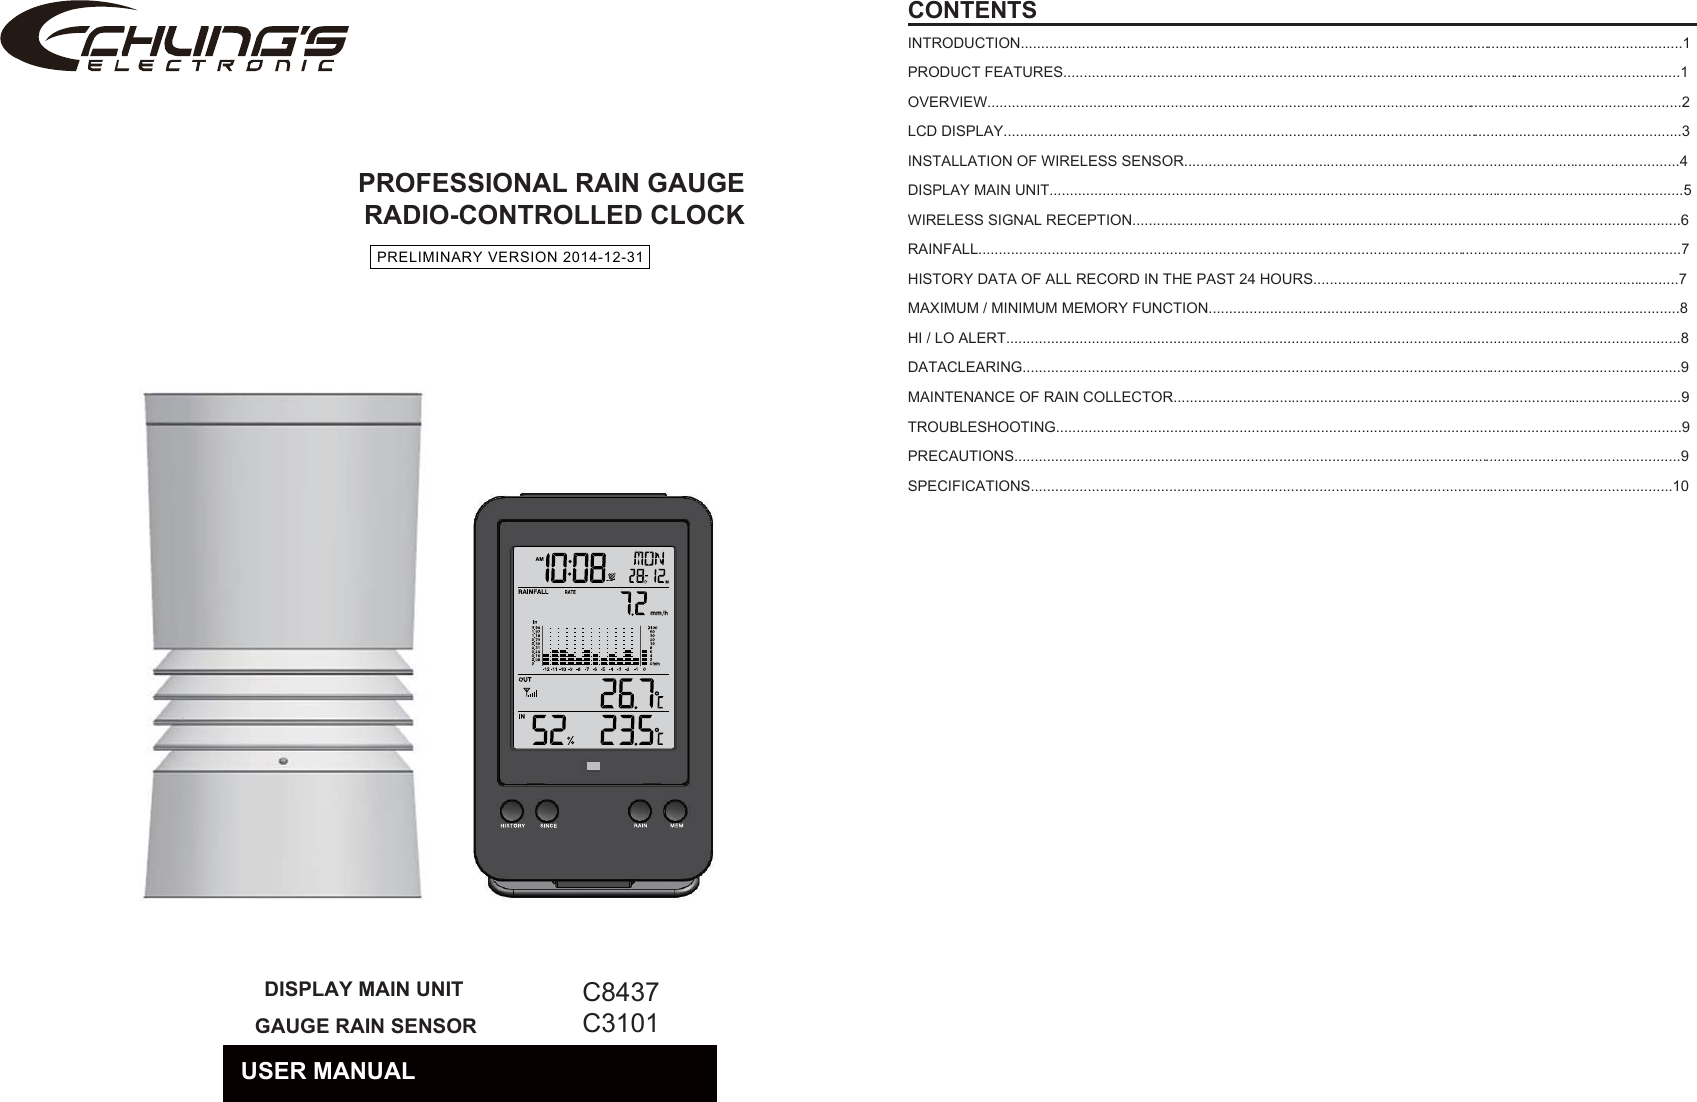 PROFESSIONAL RAIN GAUGERADIO-CONTROLLED CLOCKCONTENTSINTRODUCTION...................................................................................................................................................................1PRODUCT FEATURES........................................................................................................................................................1OVERVIEW...........................................................................................................................................................................2LCD DISPLAY.......................................................................................................................................................................3INSTALLATION OF WIRELESS SENSOR..........................................................................................................................4DISPLAY MAIN UNIT............................................................................................................................................................5WIRELESS SIGNAL RECEPTION.......................................................................................................................................6RAINFALL.............................................................................................................................................................................7HISTORY DATA OF ALL RECORD IN THE PAST 24 HOURS..........................................................................................7MAXIMUM / MINIMUM MEMORY FUNCTION....................................................................................................................8HI / LO ALERT......................................................................................................................................................................8DATACLEARING..................................................................................................................................................................9MAINTENANCE OF RAIN COLLECTOR.............................................................................................................................9TROUBLESHOOTING..........................................................................................................................................................9PRECAUTIONS....................................................................................................................................................................9SPECIFICATIONS..............................................................................................................................................................10PRELIMINARY VERSION 2014-12-31　C8437C3101USER MANUALDISPLAY MAIN UNIT GAUGE RAIN SENSOR　